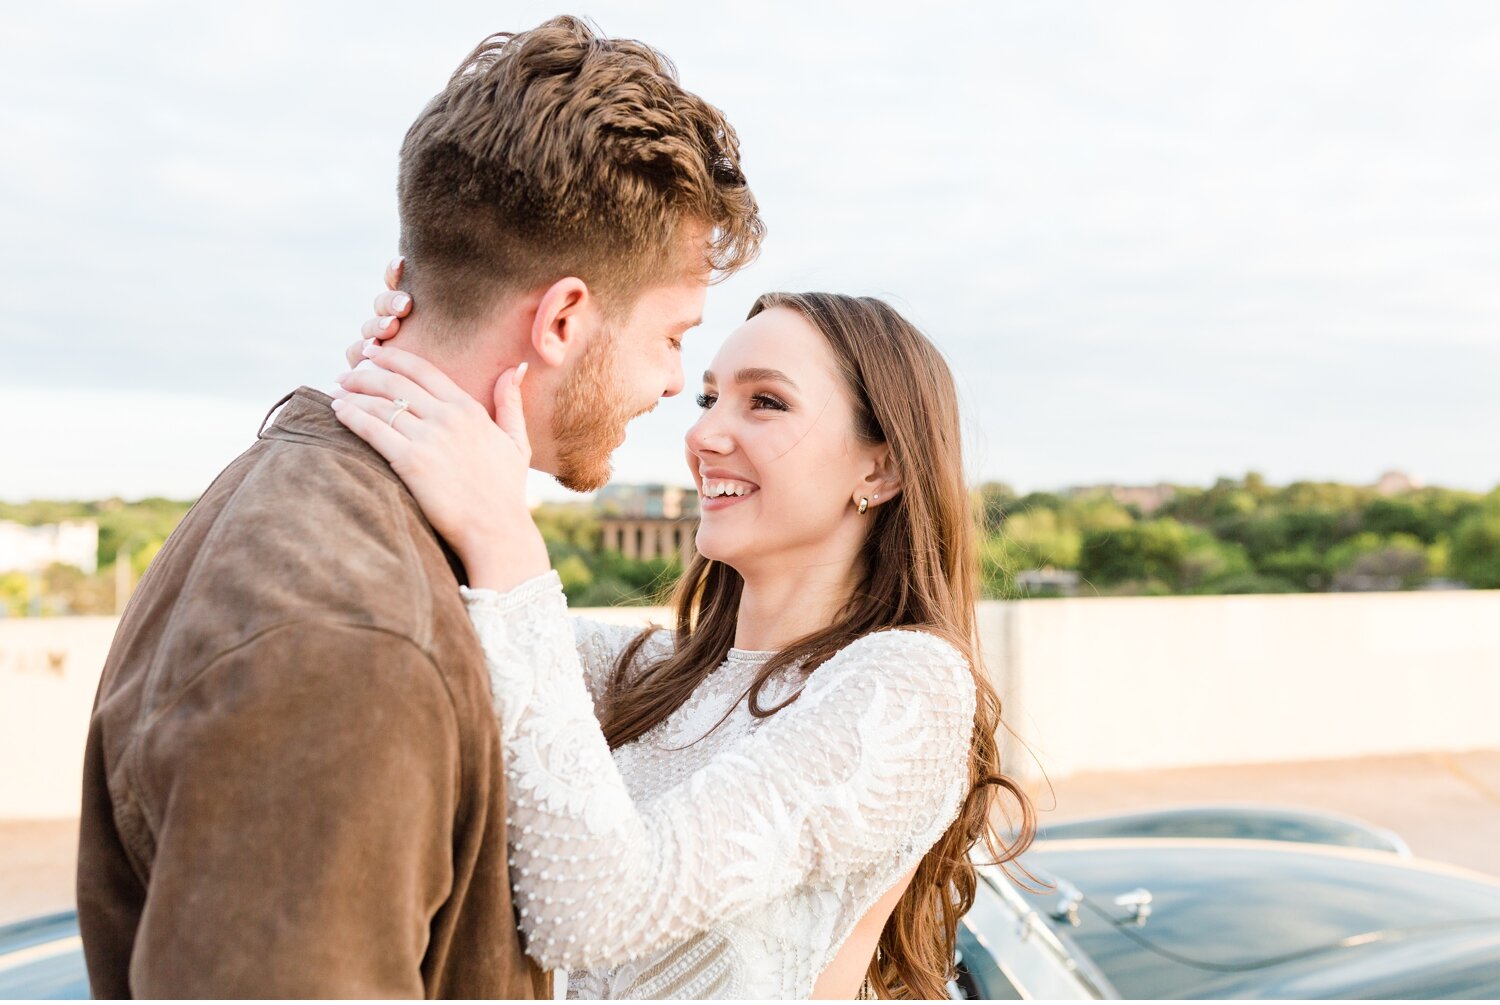 London + Christian Downtown Austin Rooftop Classic Car Engagement Session_0043.jpg